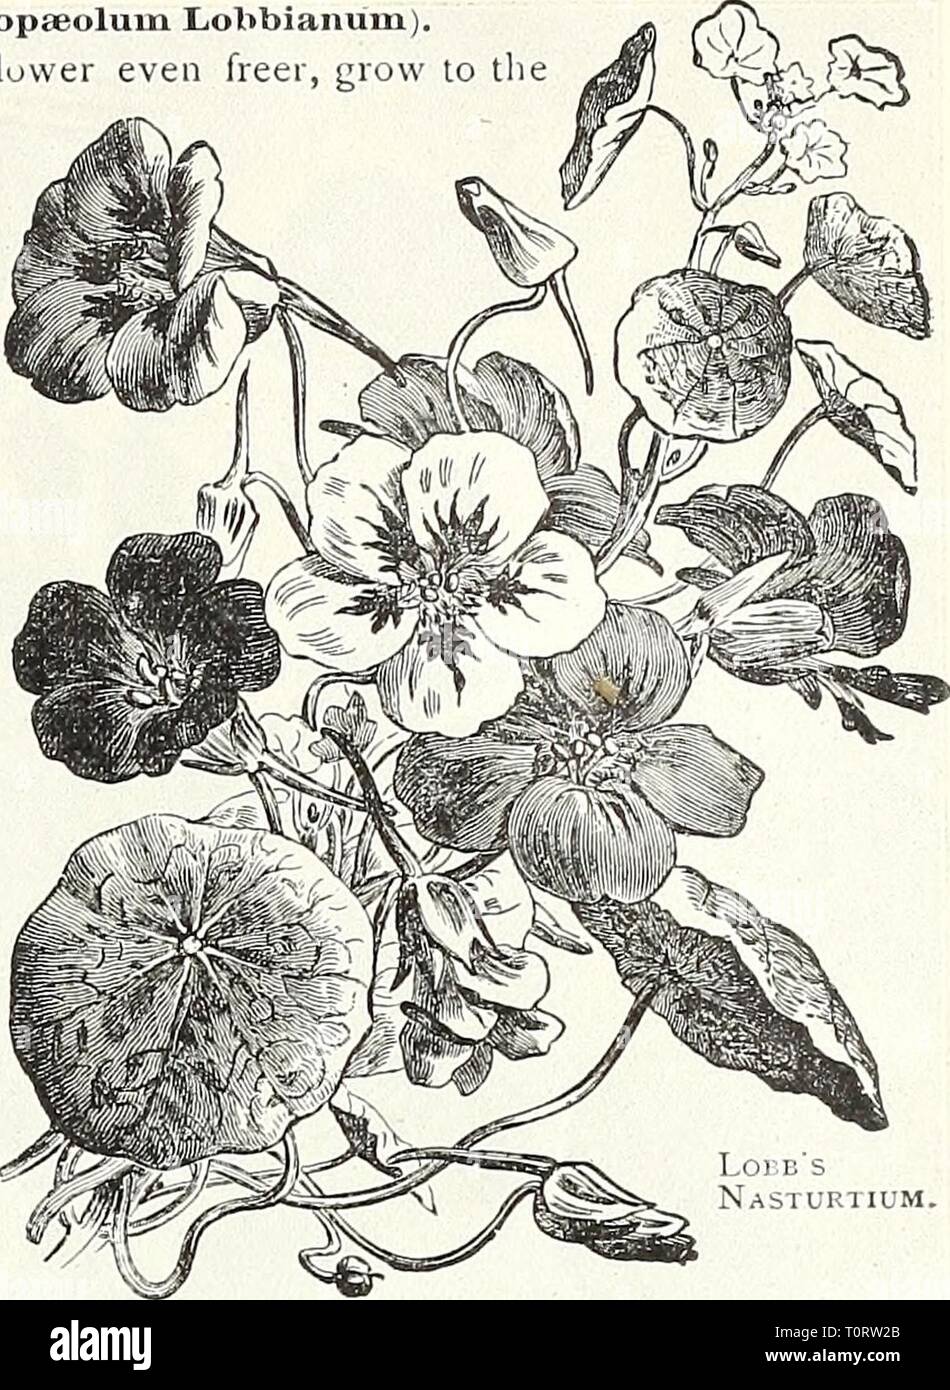 Dreer's garden book  1905 Dreer's garden book : 1905  dreersgardenbook1905henr Year: 1905  HMTADRgRffllLADELPHIA'M'W/ RELIABLE FLOWER SEEDS 89 LOBB'S CLIMBING NASTURTIUMS (Xropaeoium There is little difference between these same height and are very desirable. Lobbianuiu). and the tall Nabturtiums. They flower even freer, grow to the PER oz. . 20 . 20 Deep velvety gar- PKT. 5 5 5 5 5 5 10 5 50 3252 Brilliant. Dark scarlet 3256 Spitfire. Brilliant scarlet 3255 Ro8 des Noirs {King of the Blacks) net; very rich -0 3251 Asa Qray. Primrose yellow, almost white 20 3253 Crown Prince of Prussia. Deep b Stock Photo